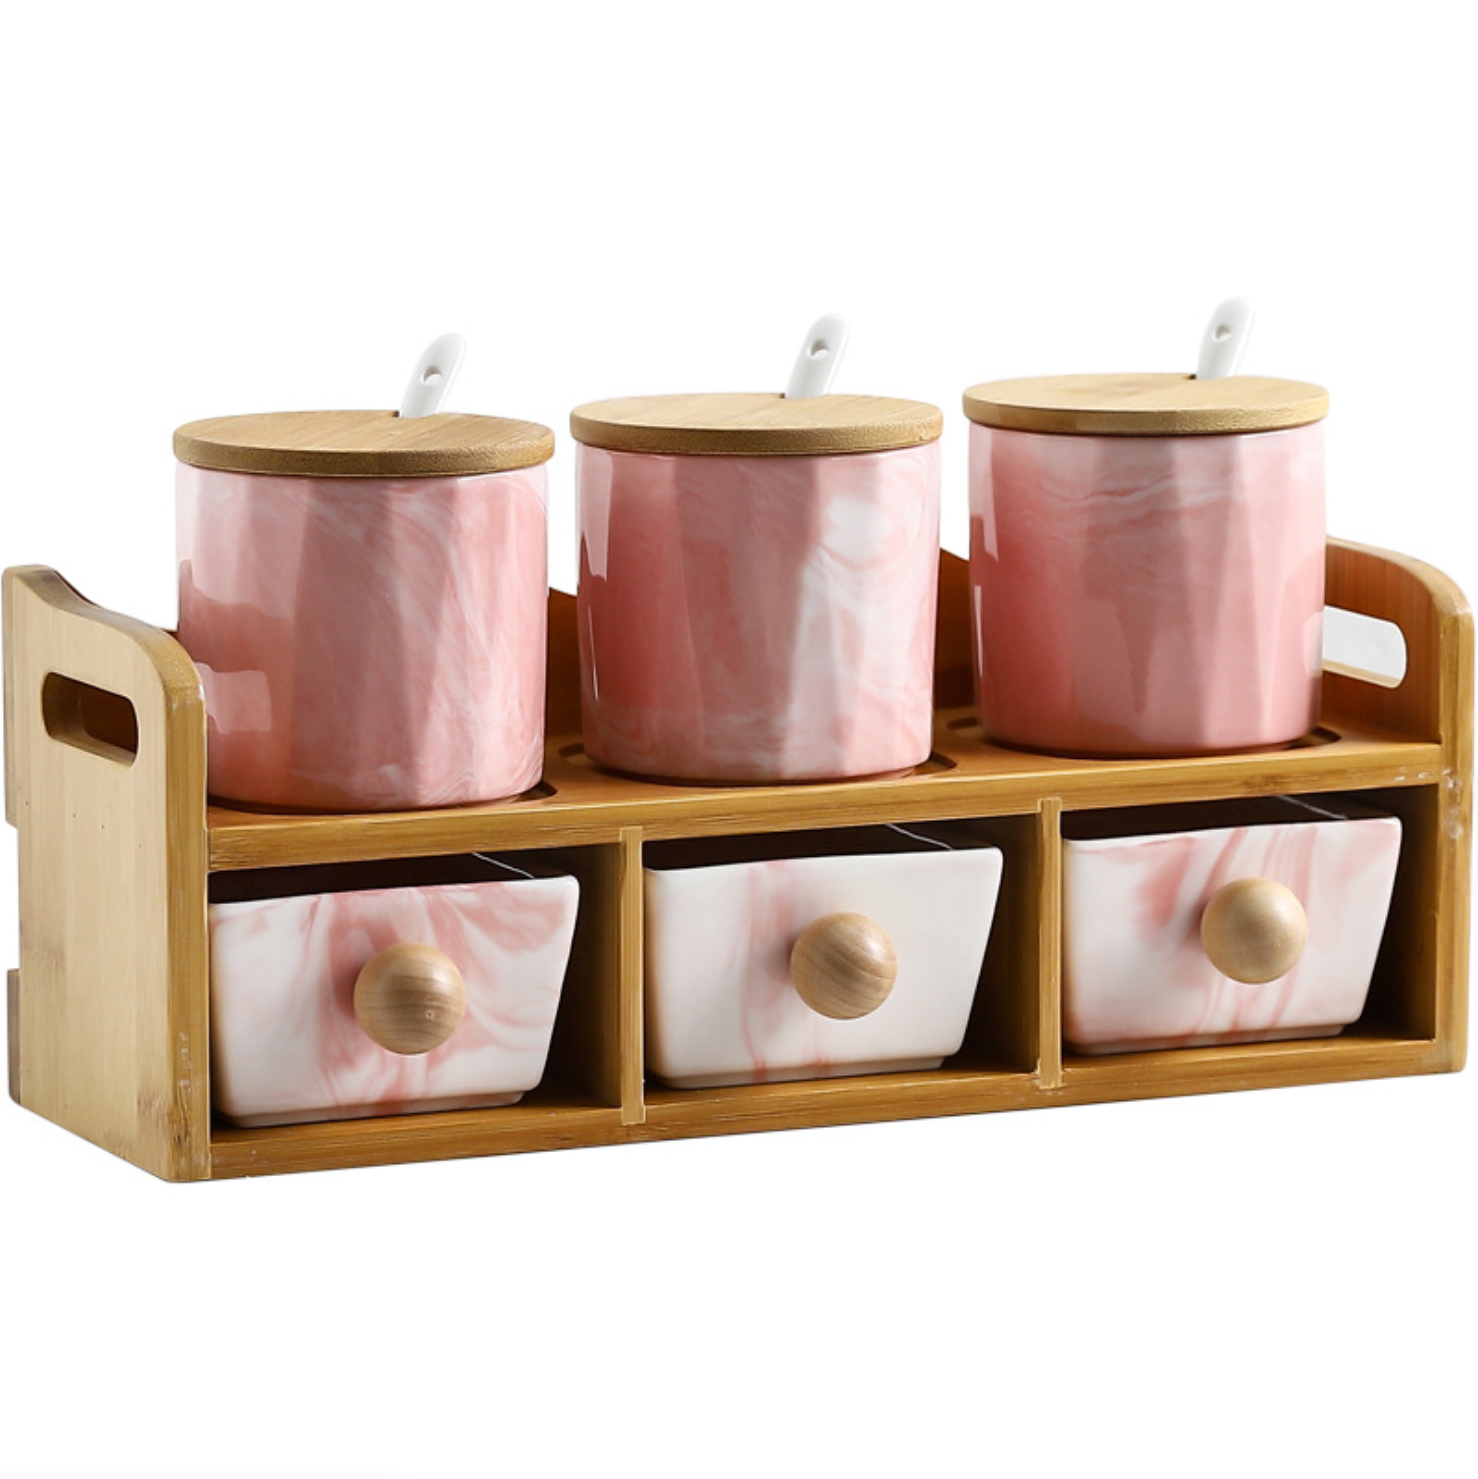 ADC Brand Pink Wooden Spice Jars containers Masala Box, For Kitchen